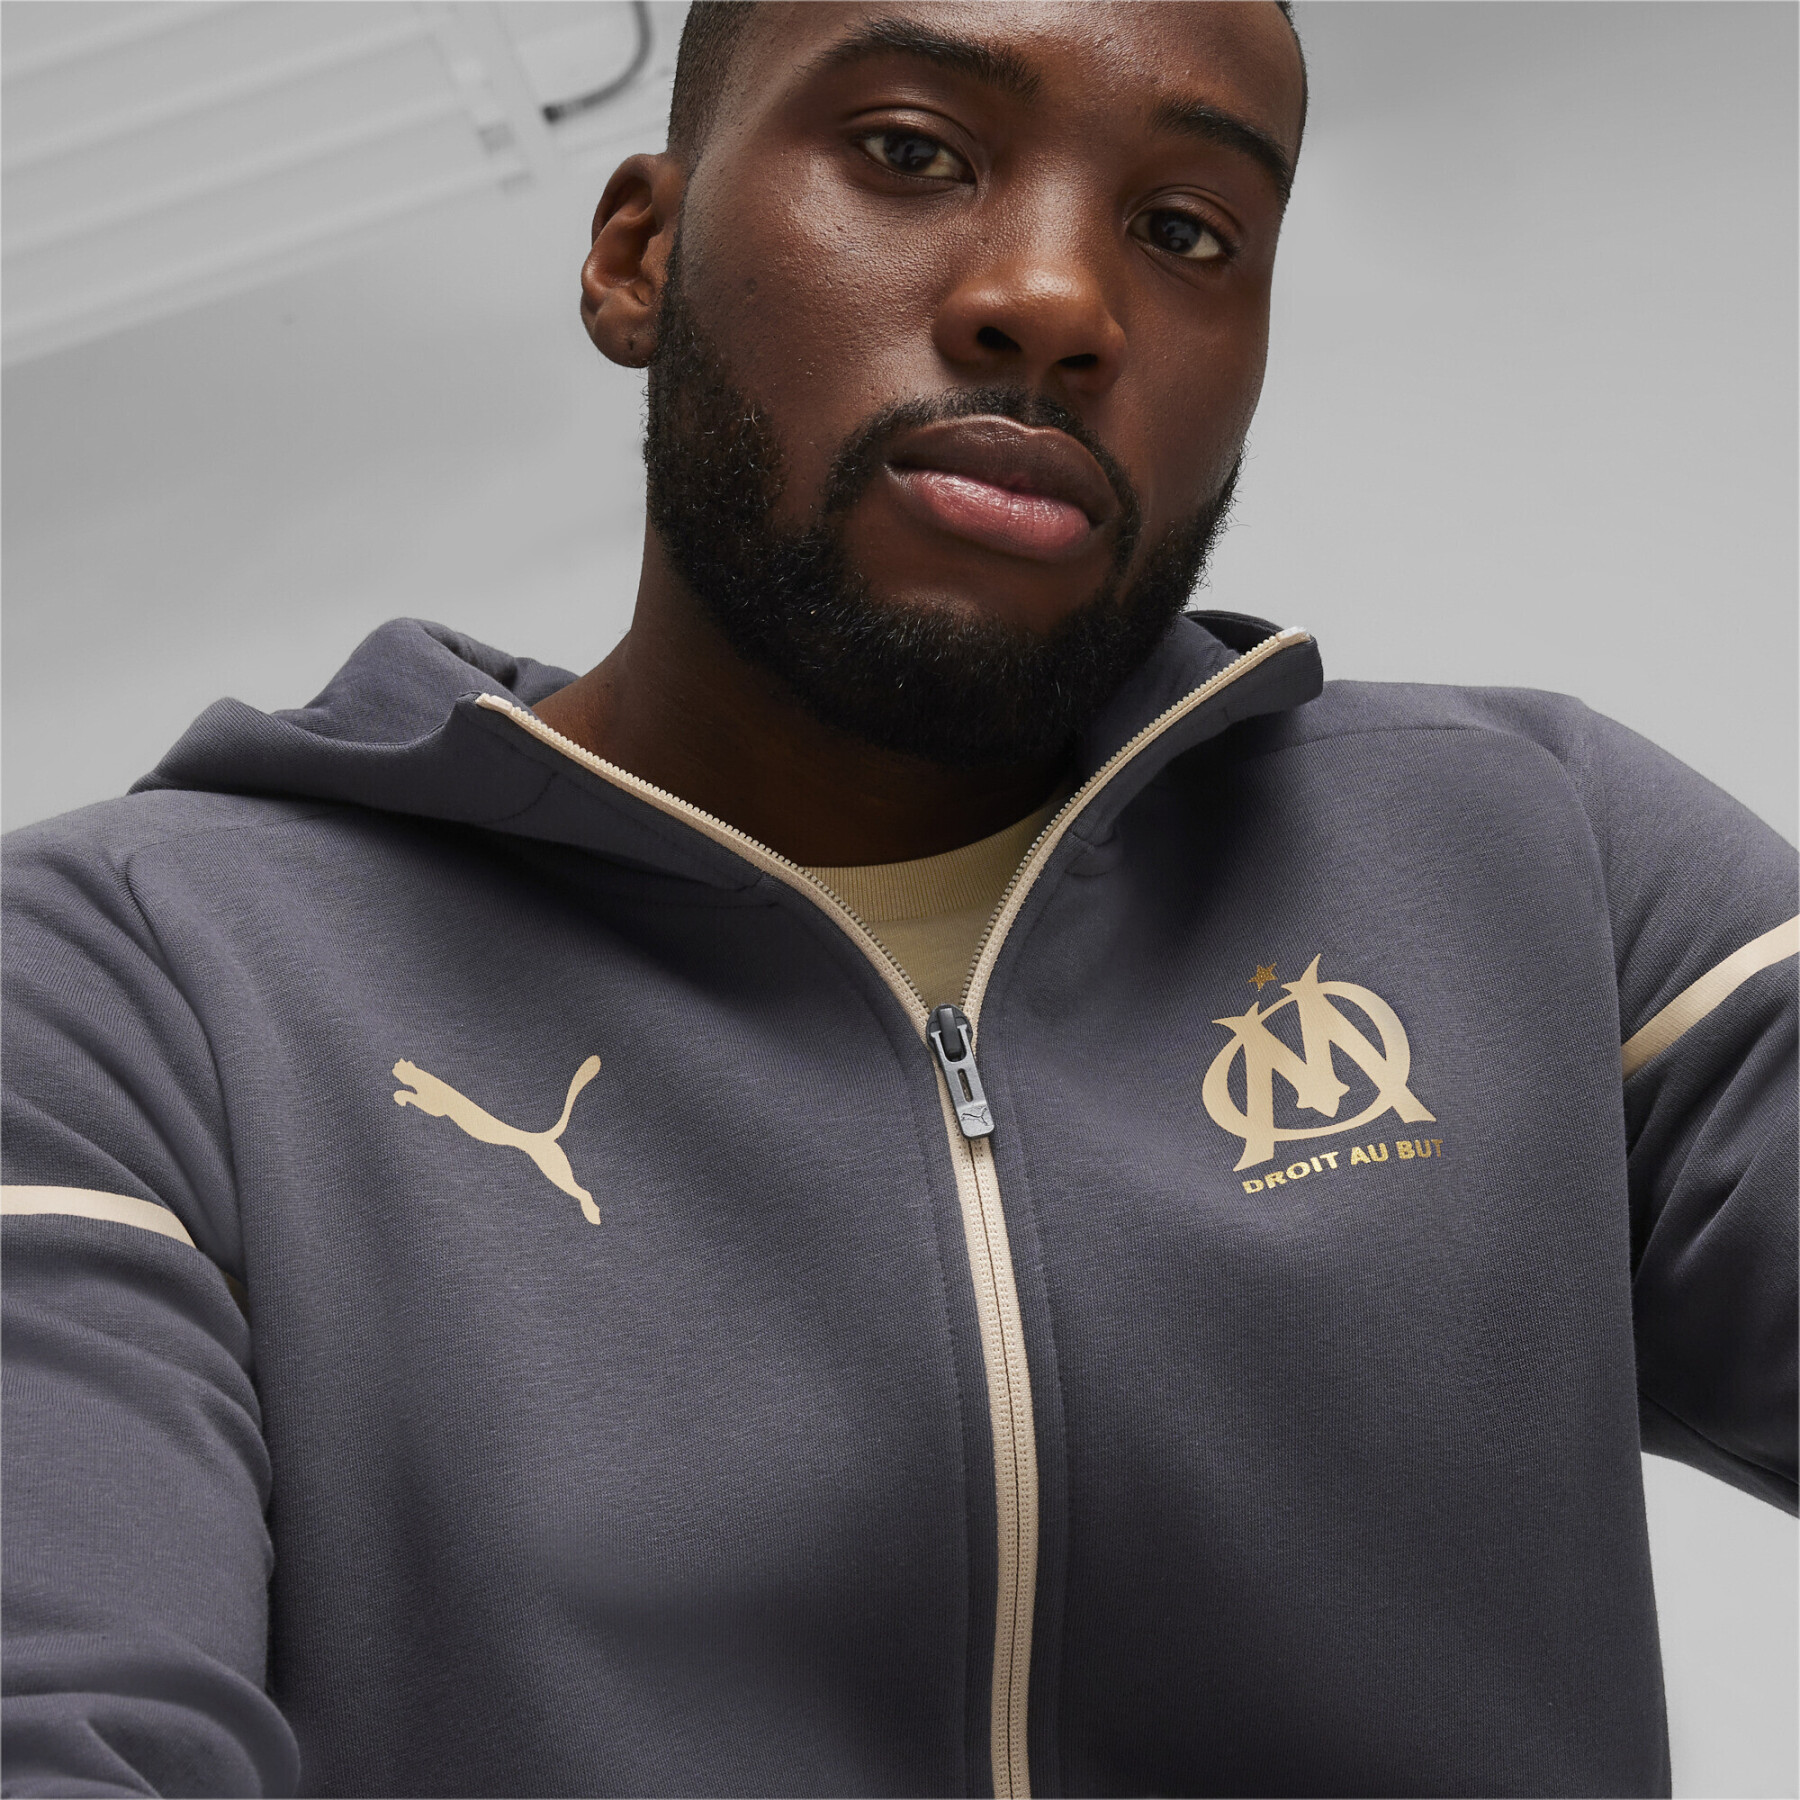 Hooded tracksuit jacket om casuals 2023/24